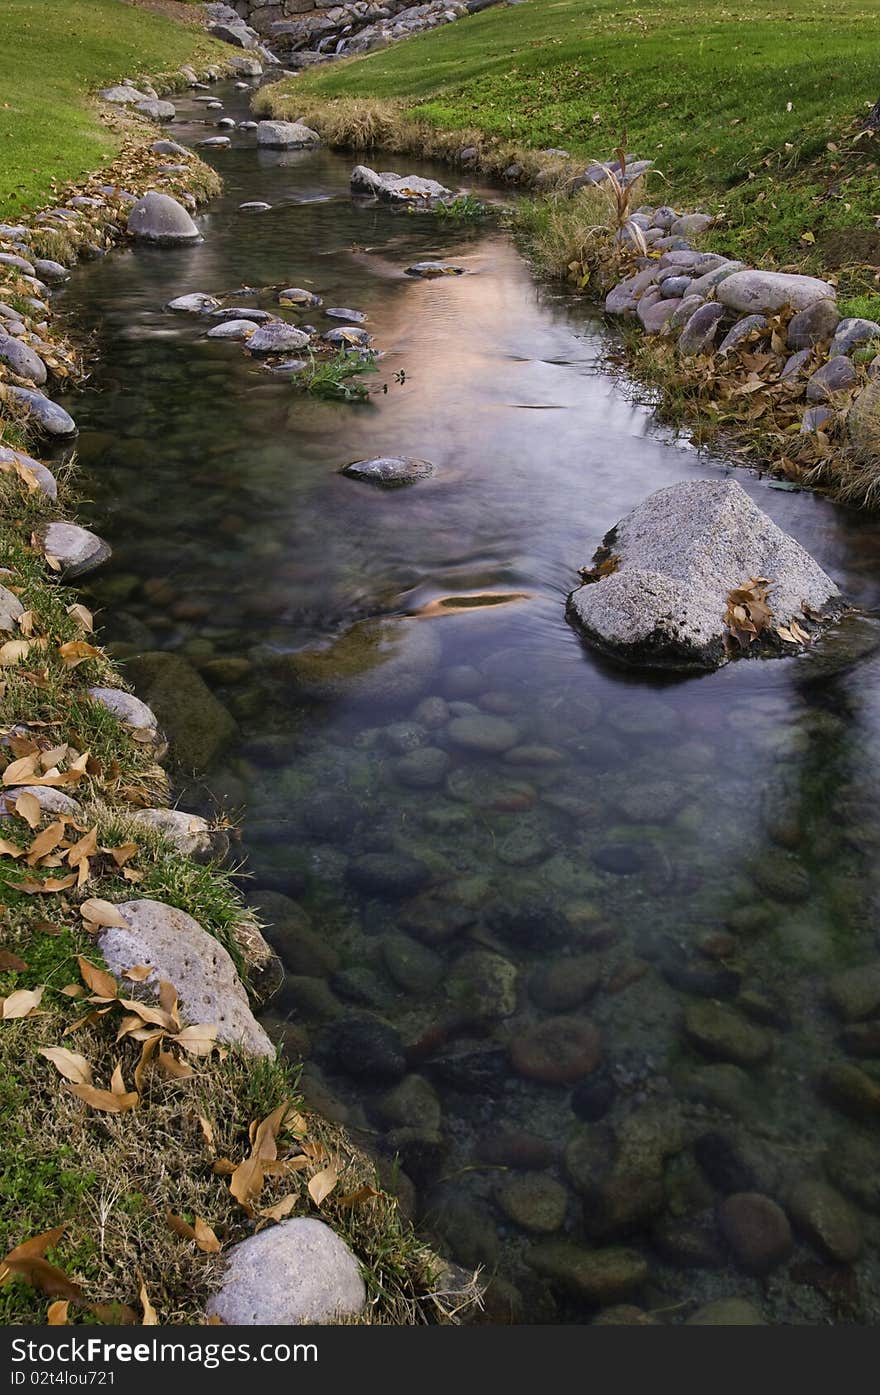 A slow moving creek with green grass and fall leaves glows as the sun rises. A slow moving creek with green grass and fall leaves glows as the sun rises.